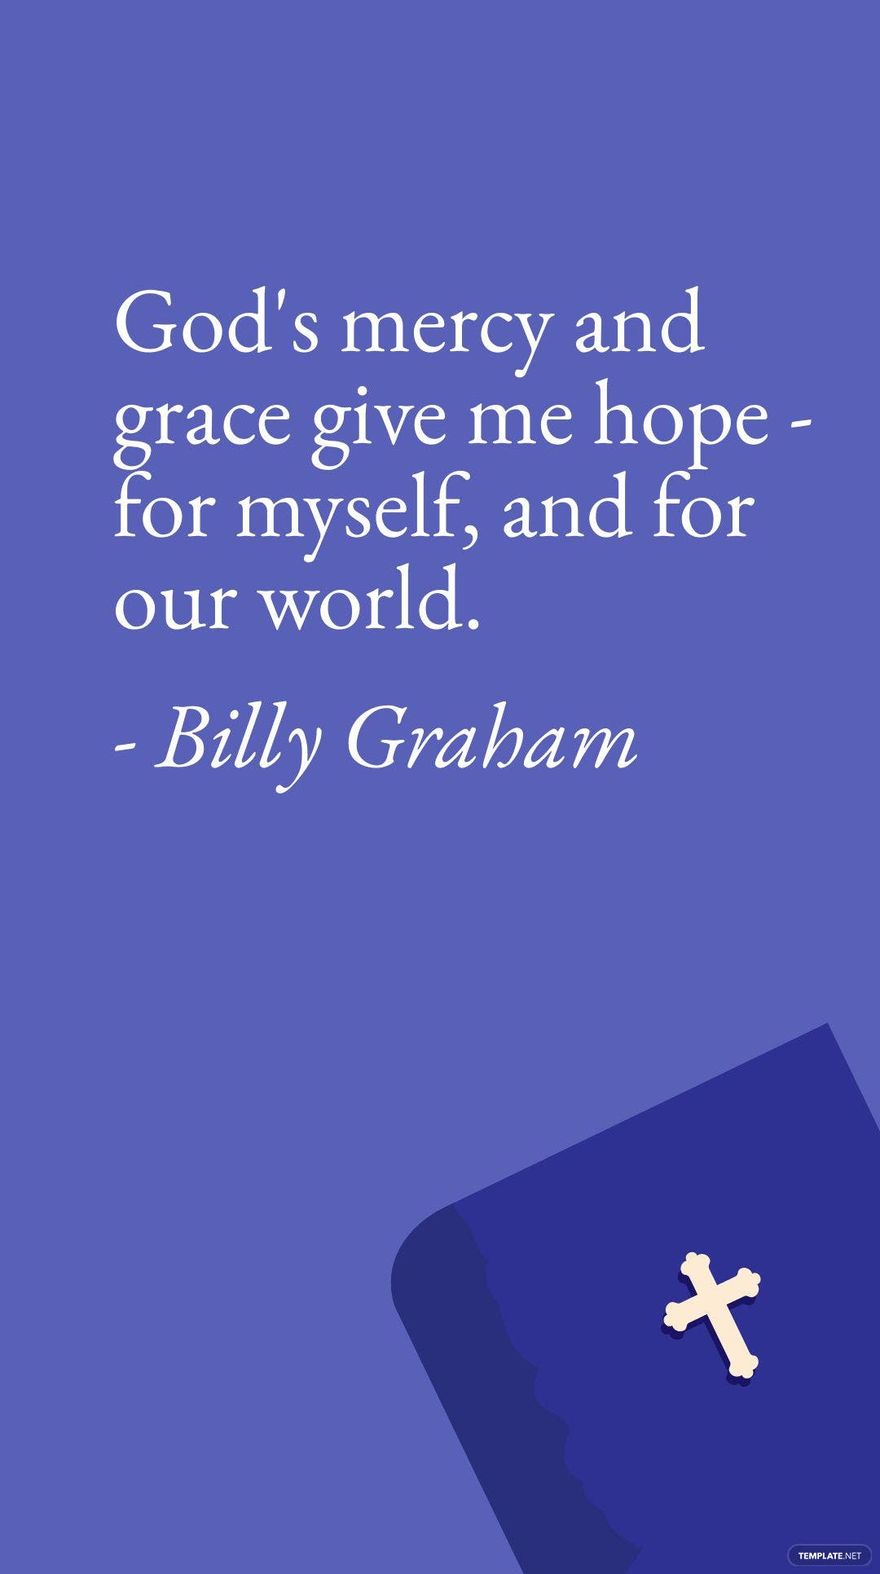 Billy Graham - God's mercy and grace give me hope - for myself, and for our world.